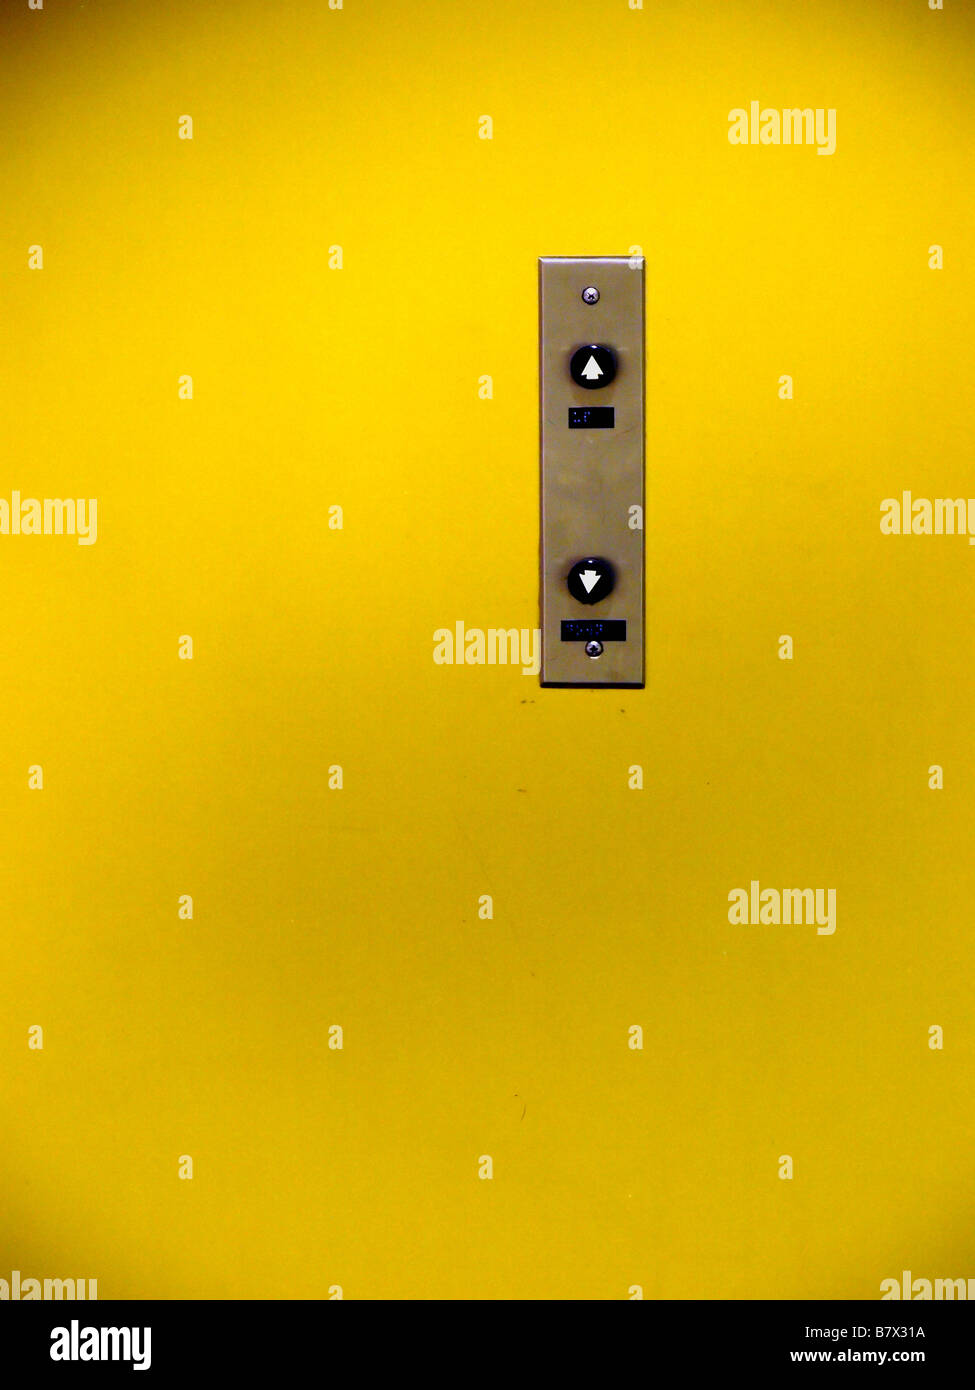 Vintage up and down elevator buttons on a stainless steel panel in the middle of a painted yellow wall. Stock Photo